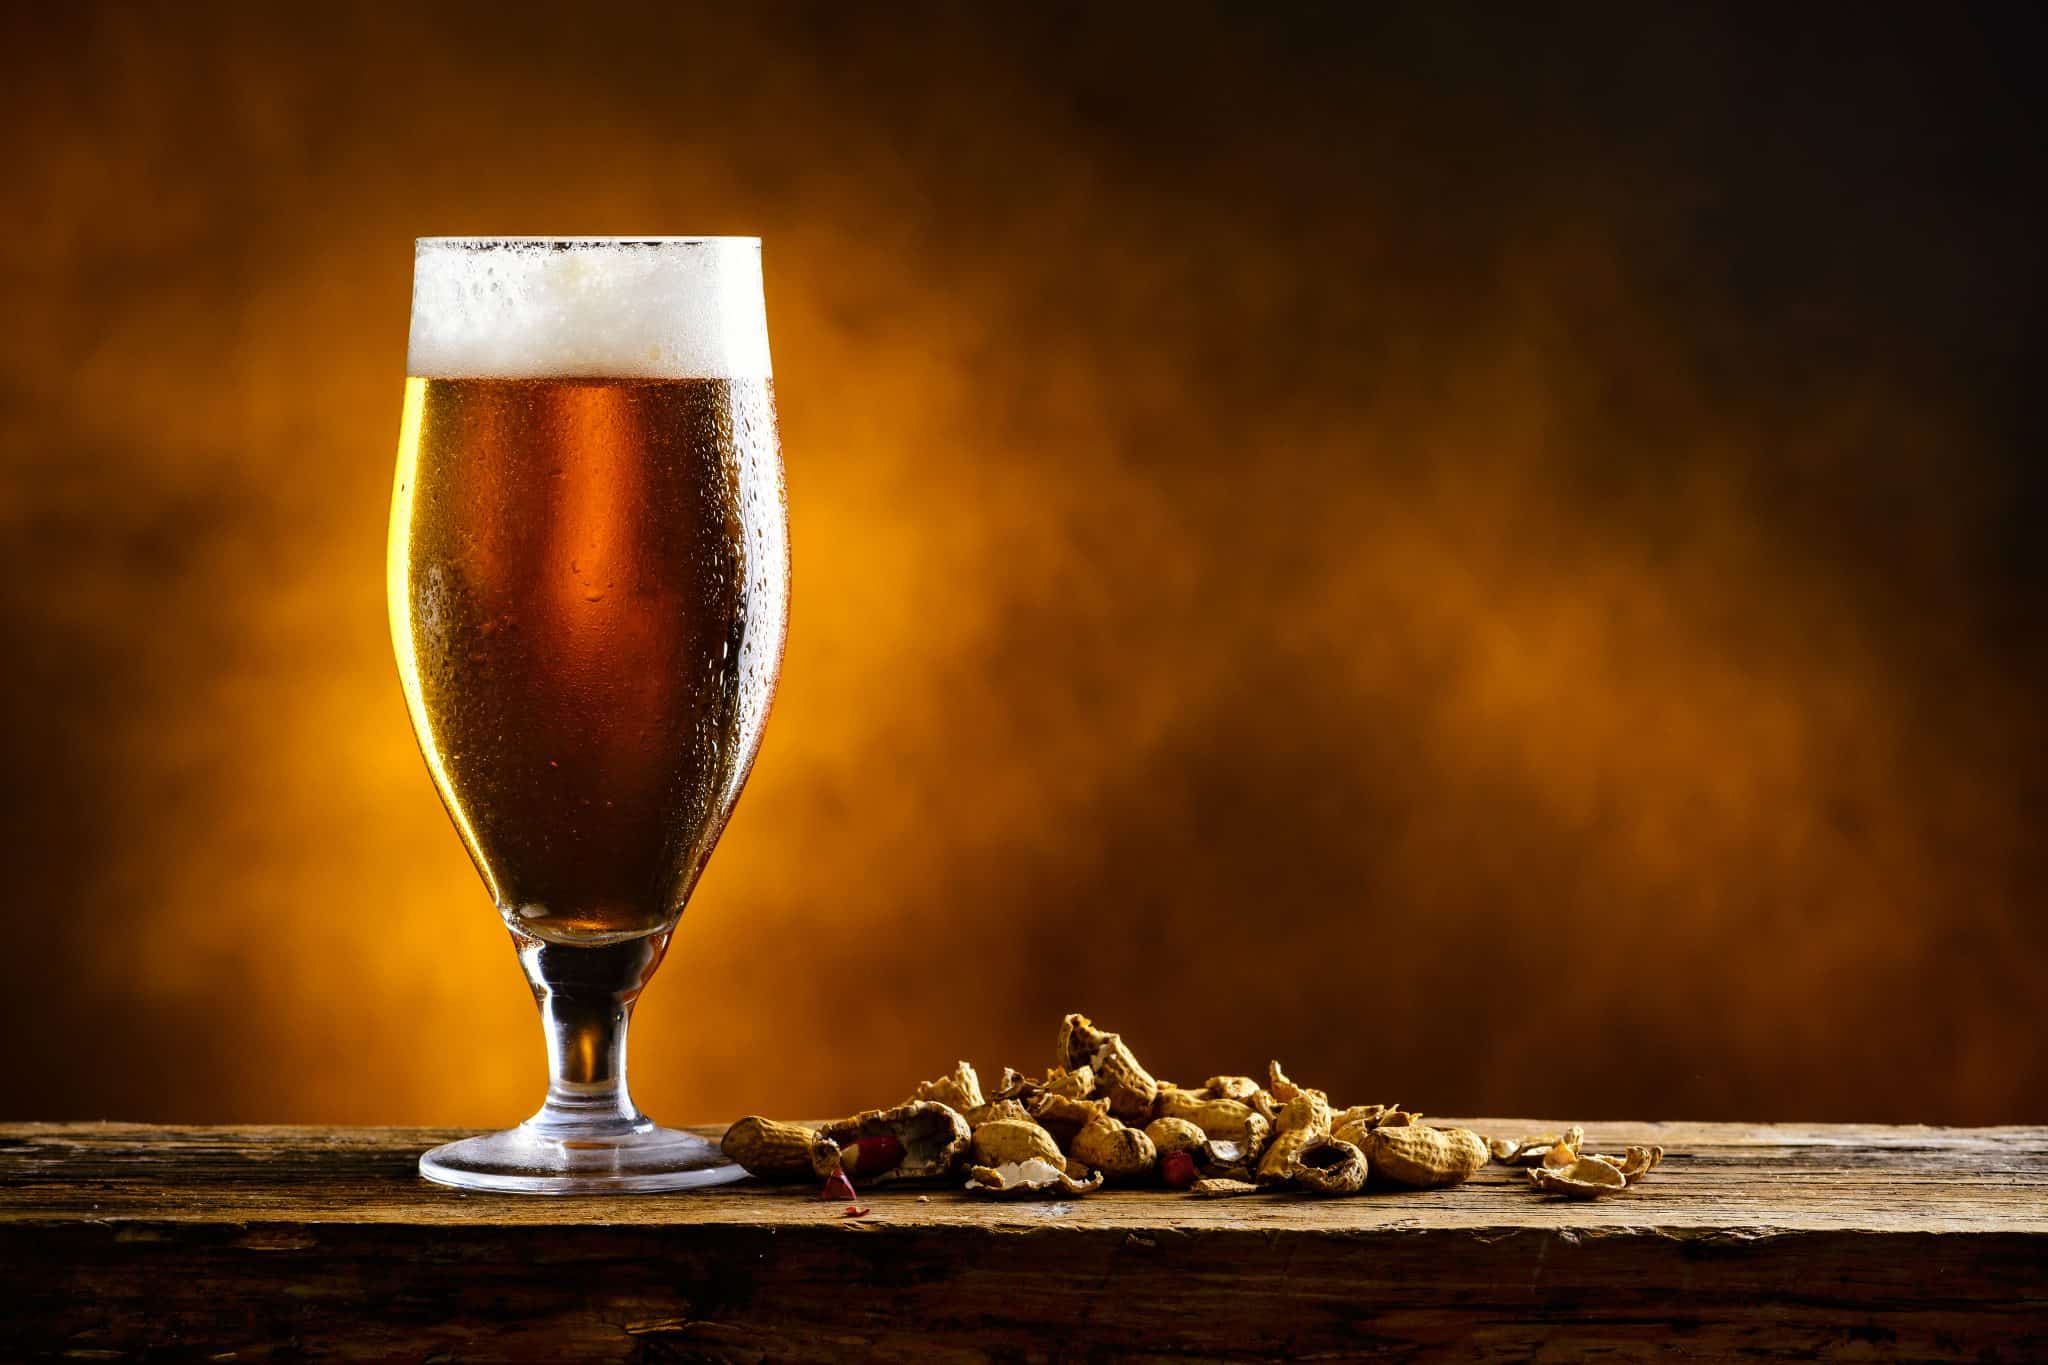 The photo shows a tall glass of beer with foam on top, on a wooden surface with peanuts next to it, and a warm, dark background.